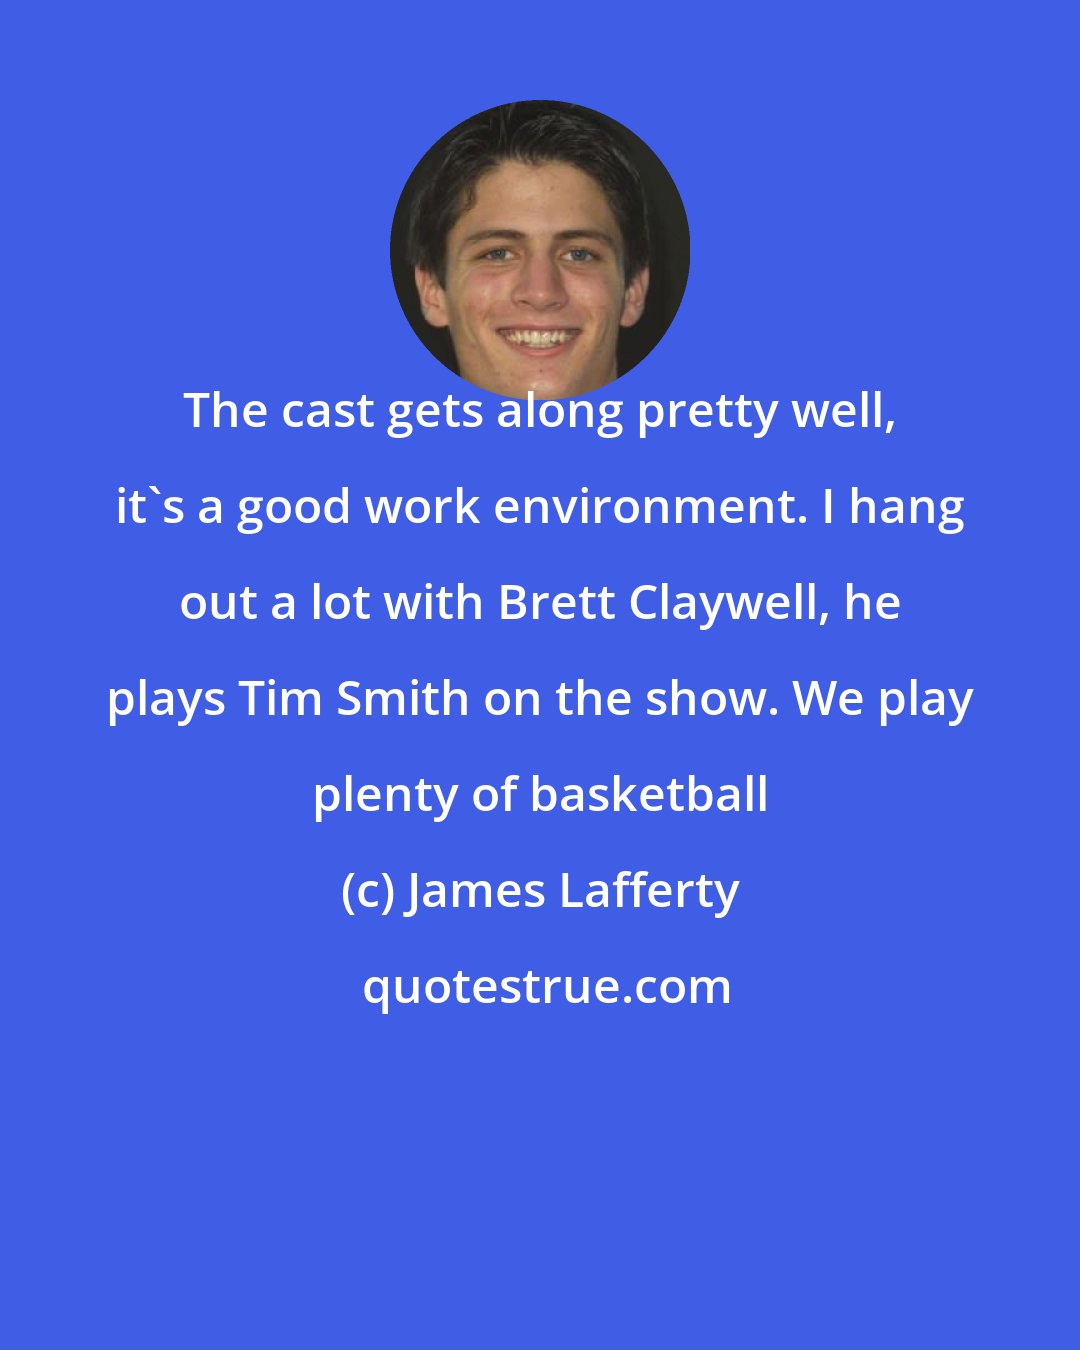 James Lafferty: The cast gets along pretty well, it's a good work environment. I hang out a lot with Brett Claywell, he plays Tim Smith on the show. We play plenty of basketball